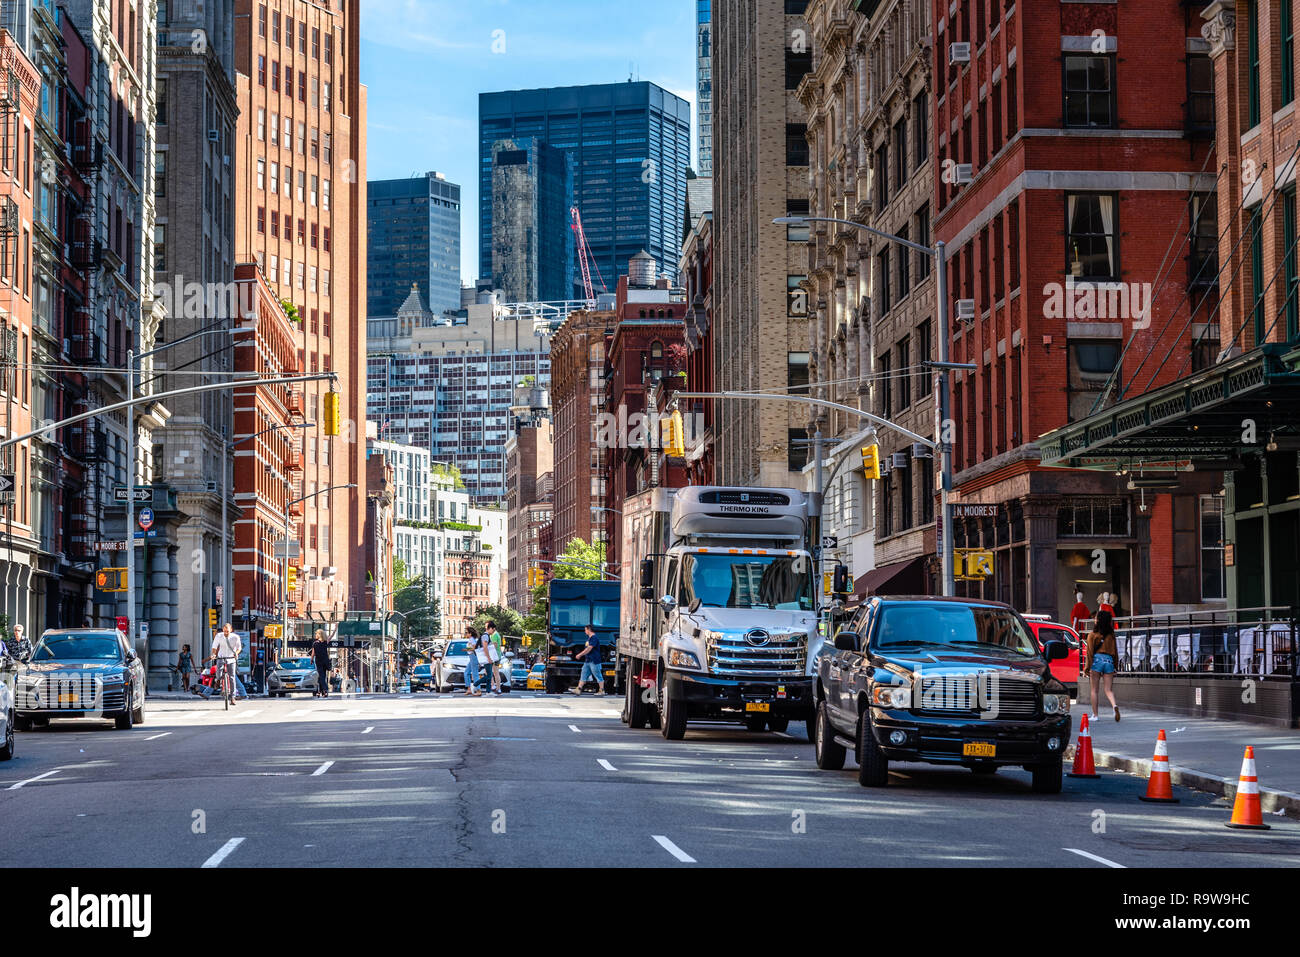 New York City, USA - June 25, 2018: Street view of Moore St in Tribeca North District a sunny day of summer Stock Photo